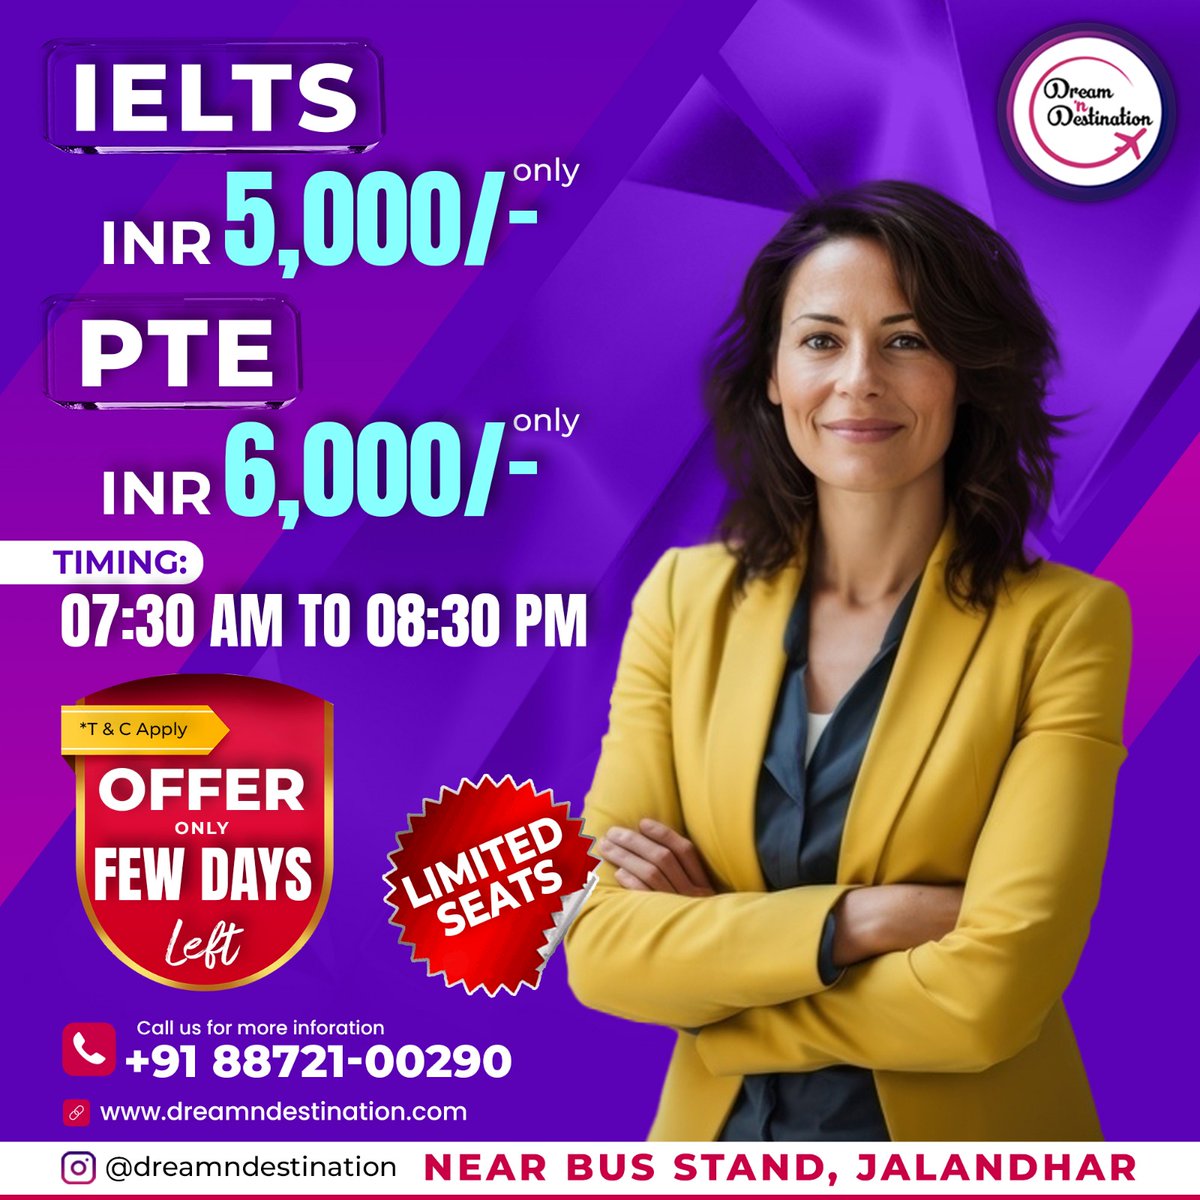 Limited Seats Available for IELTS & PTE Classes
📷 Enroll today at Dream 'n Destination, few days left for this offer. IELTS at just 5,000/- and PTE at 6,000/- only. So, waiting for what? Visit our institute and book your seat NOW. 
#PTE #ptepreparation #PTEExam #pteacademic